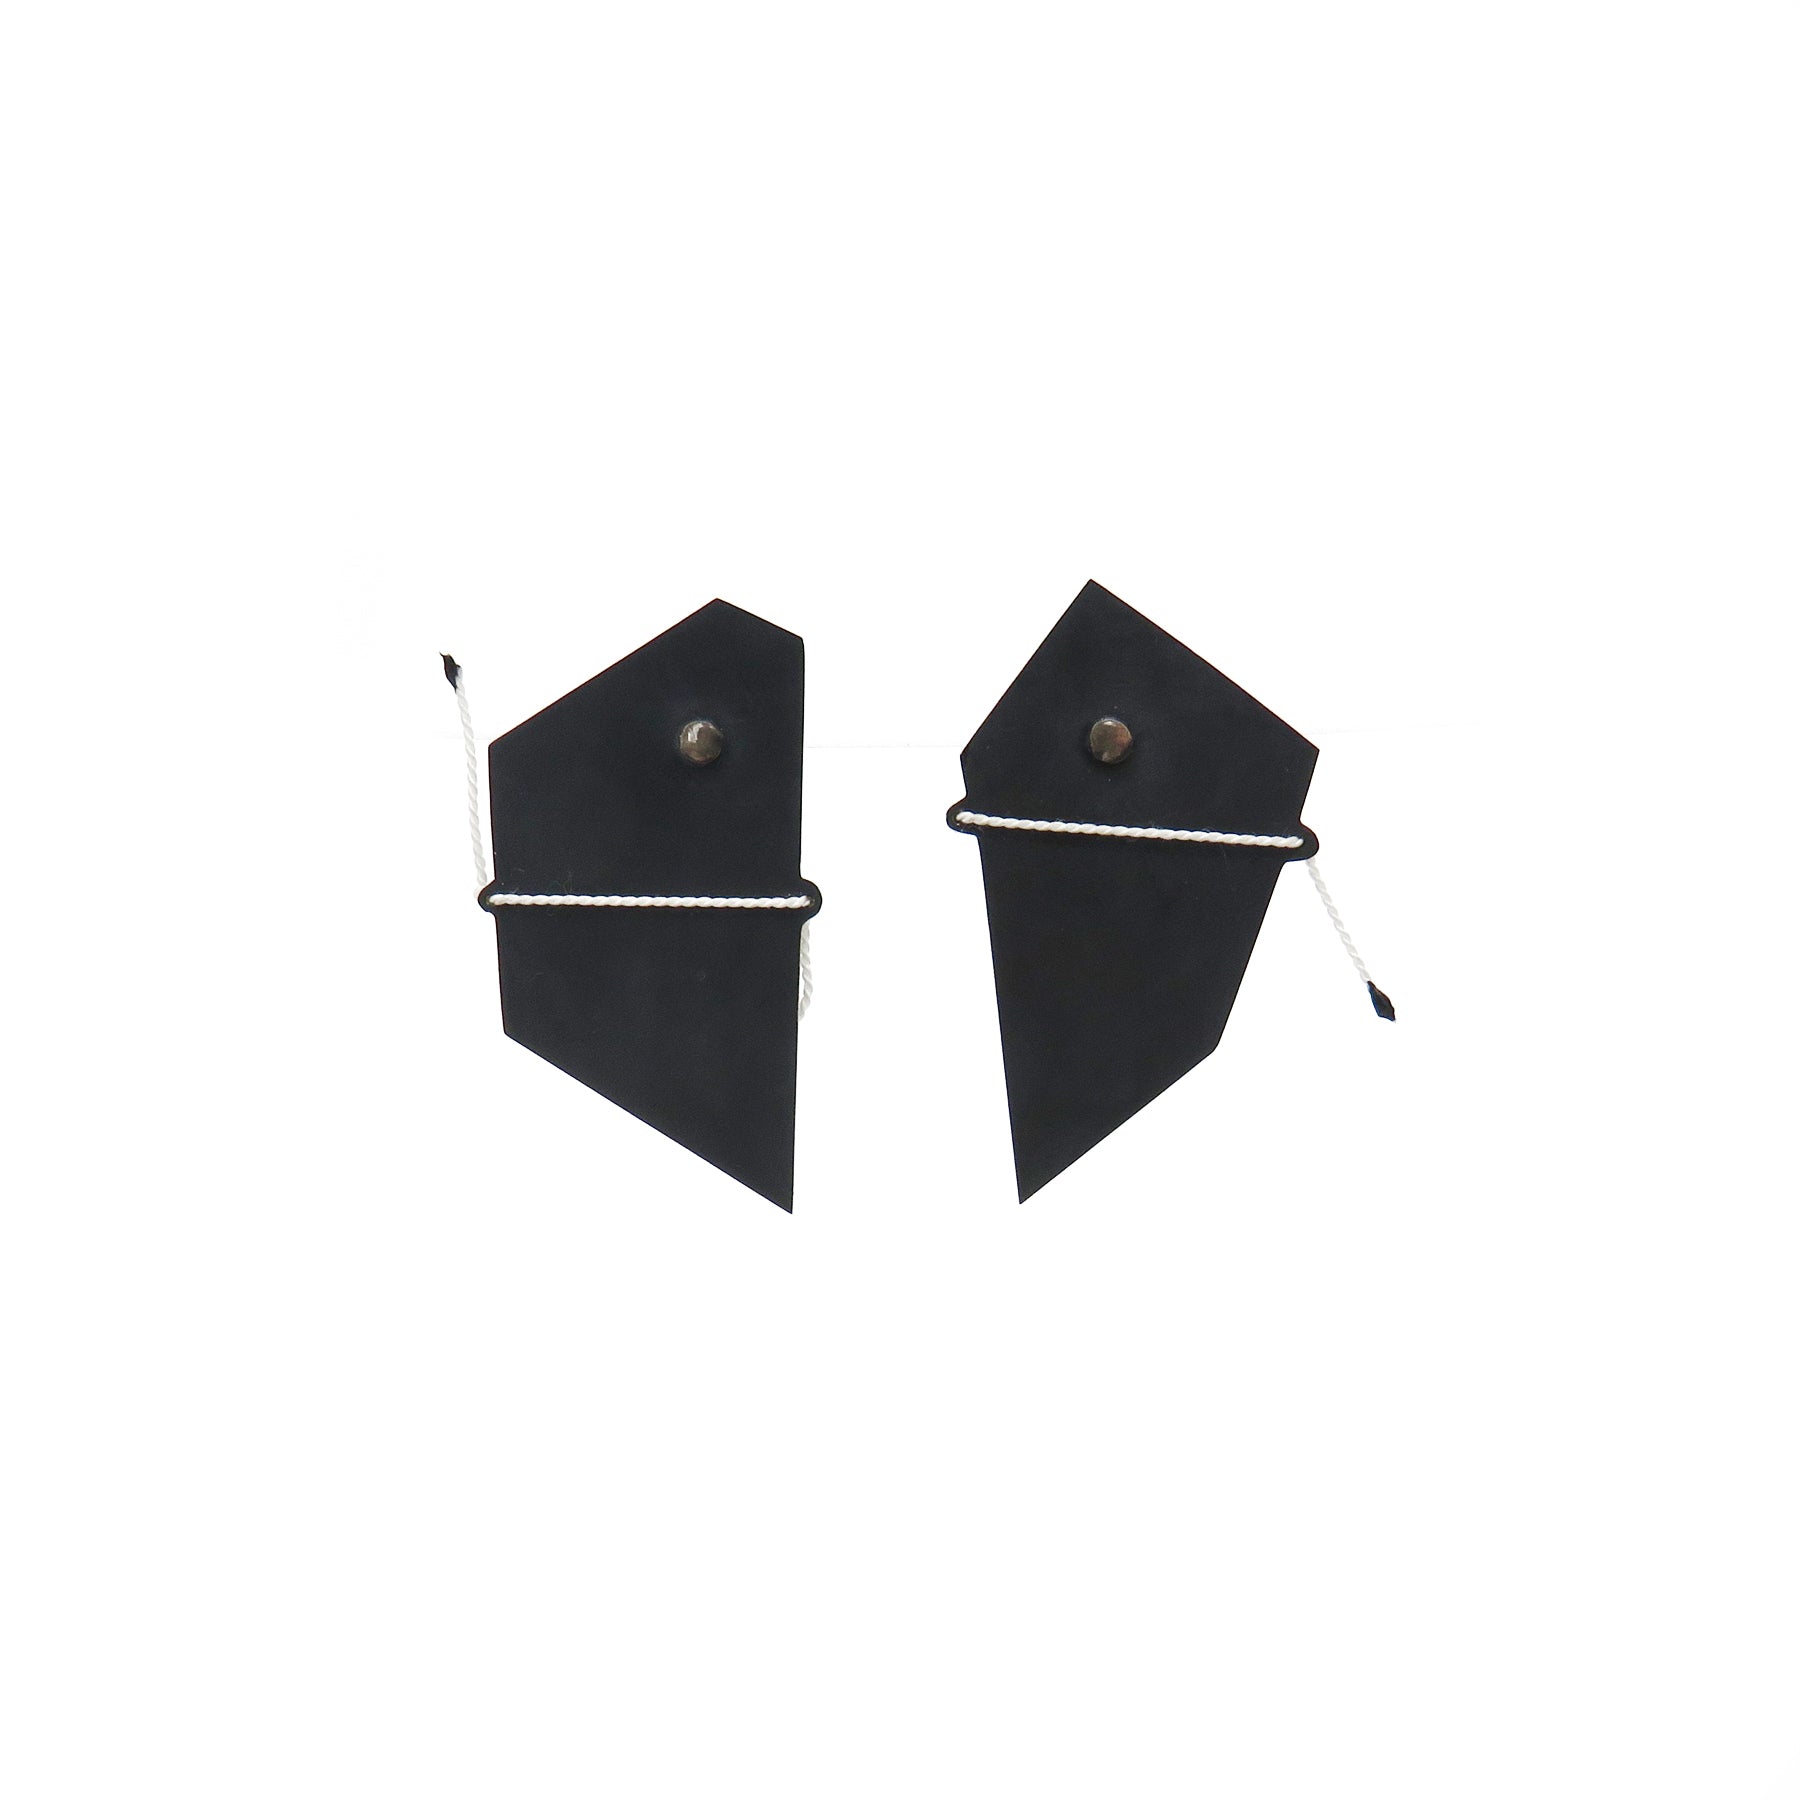 Black shadow studs with white thread